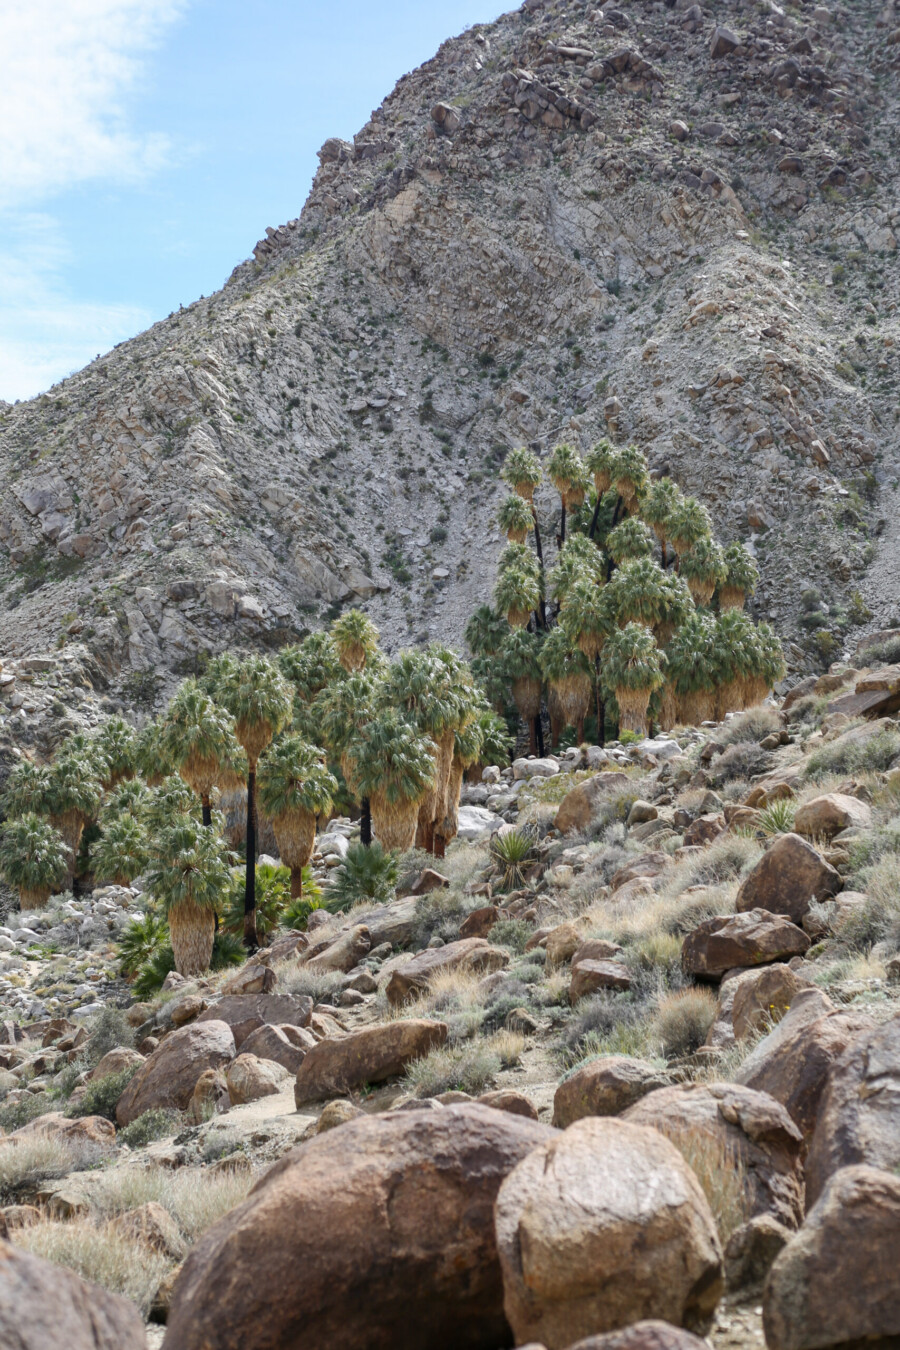 View of the palm oasis set against the rocky landscape on the 49 Palms Oasis trail in Joshua Tree National Park, California.